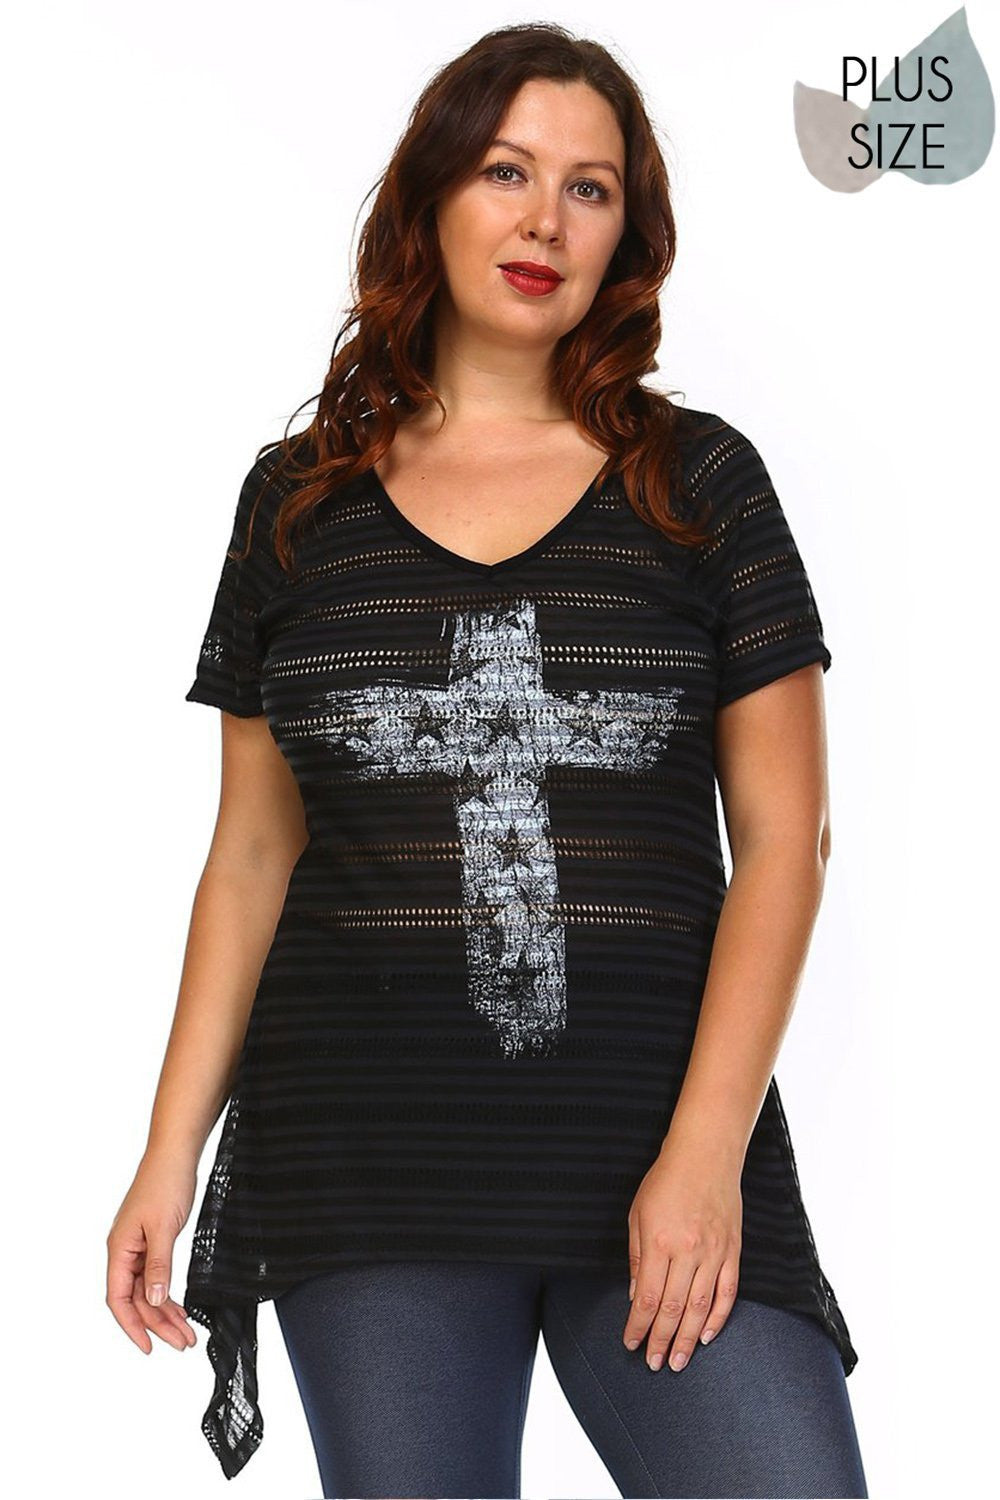 Beautiful woman wearing a Black V-neck Short Sleeve Vintage Cross Graphic tunic top Perfect skirt for an effortless boho style, pair with boots for fall or your favorite sandals for summer. Festivals, Beach Day, Vacation